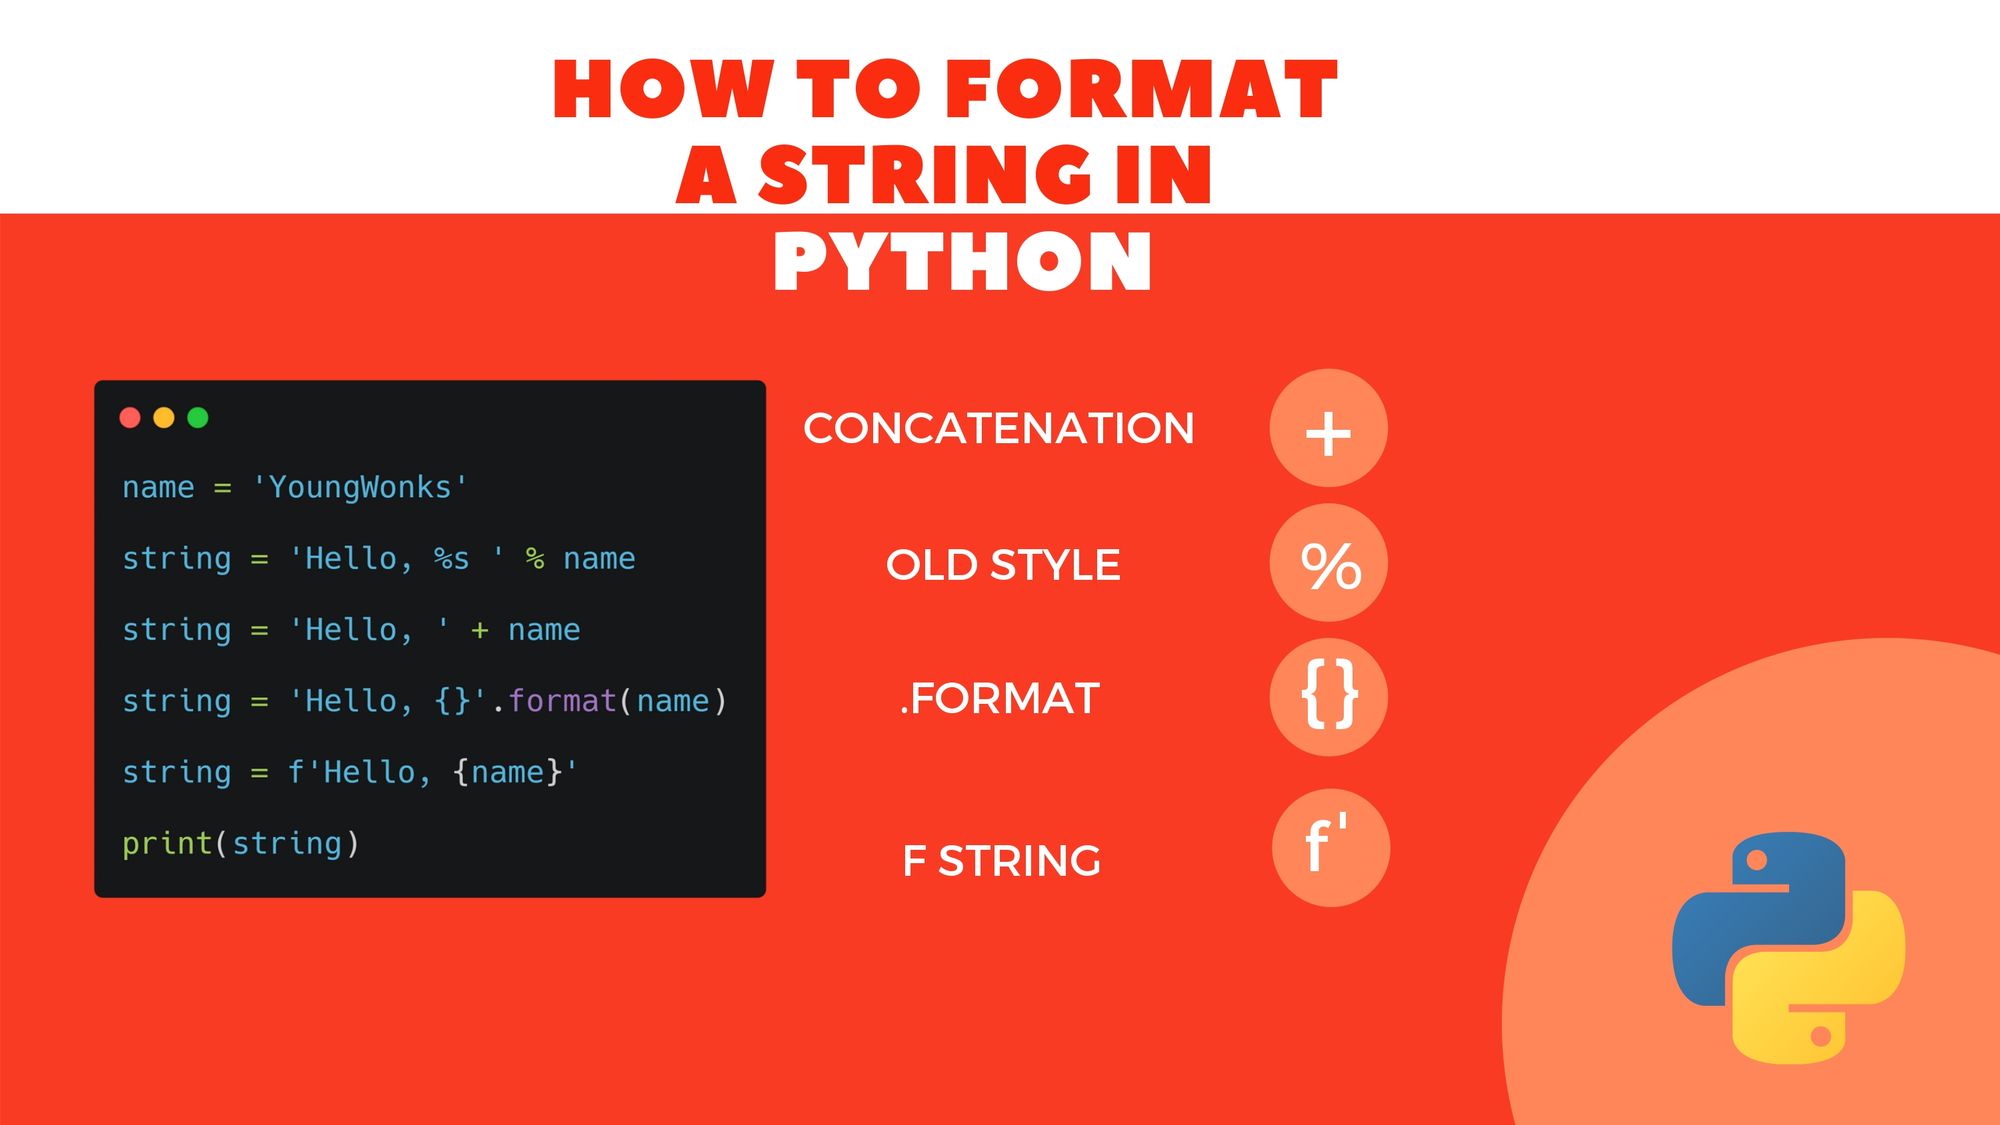 How to Format in Python